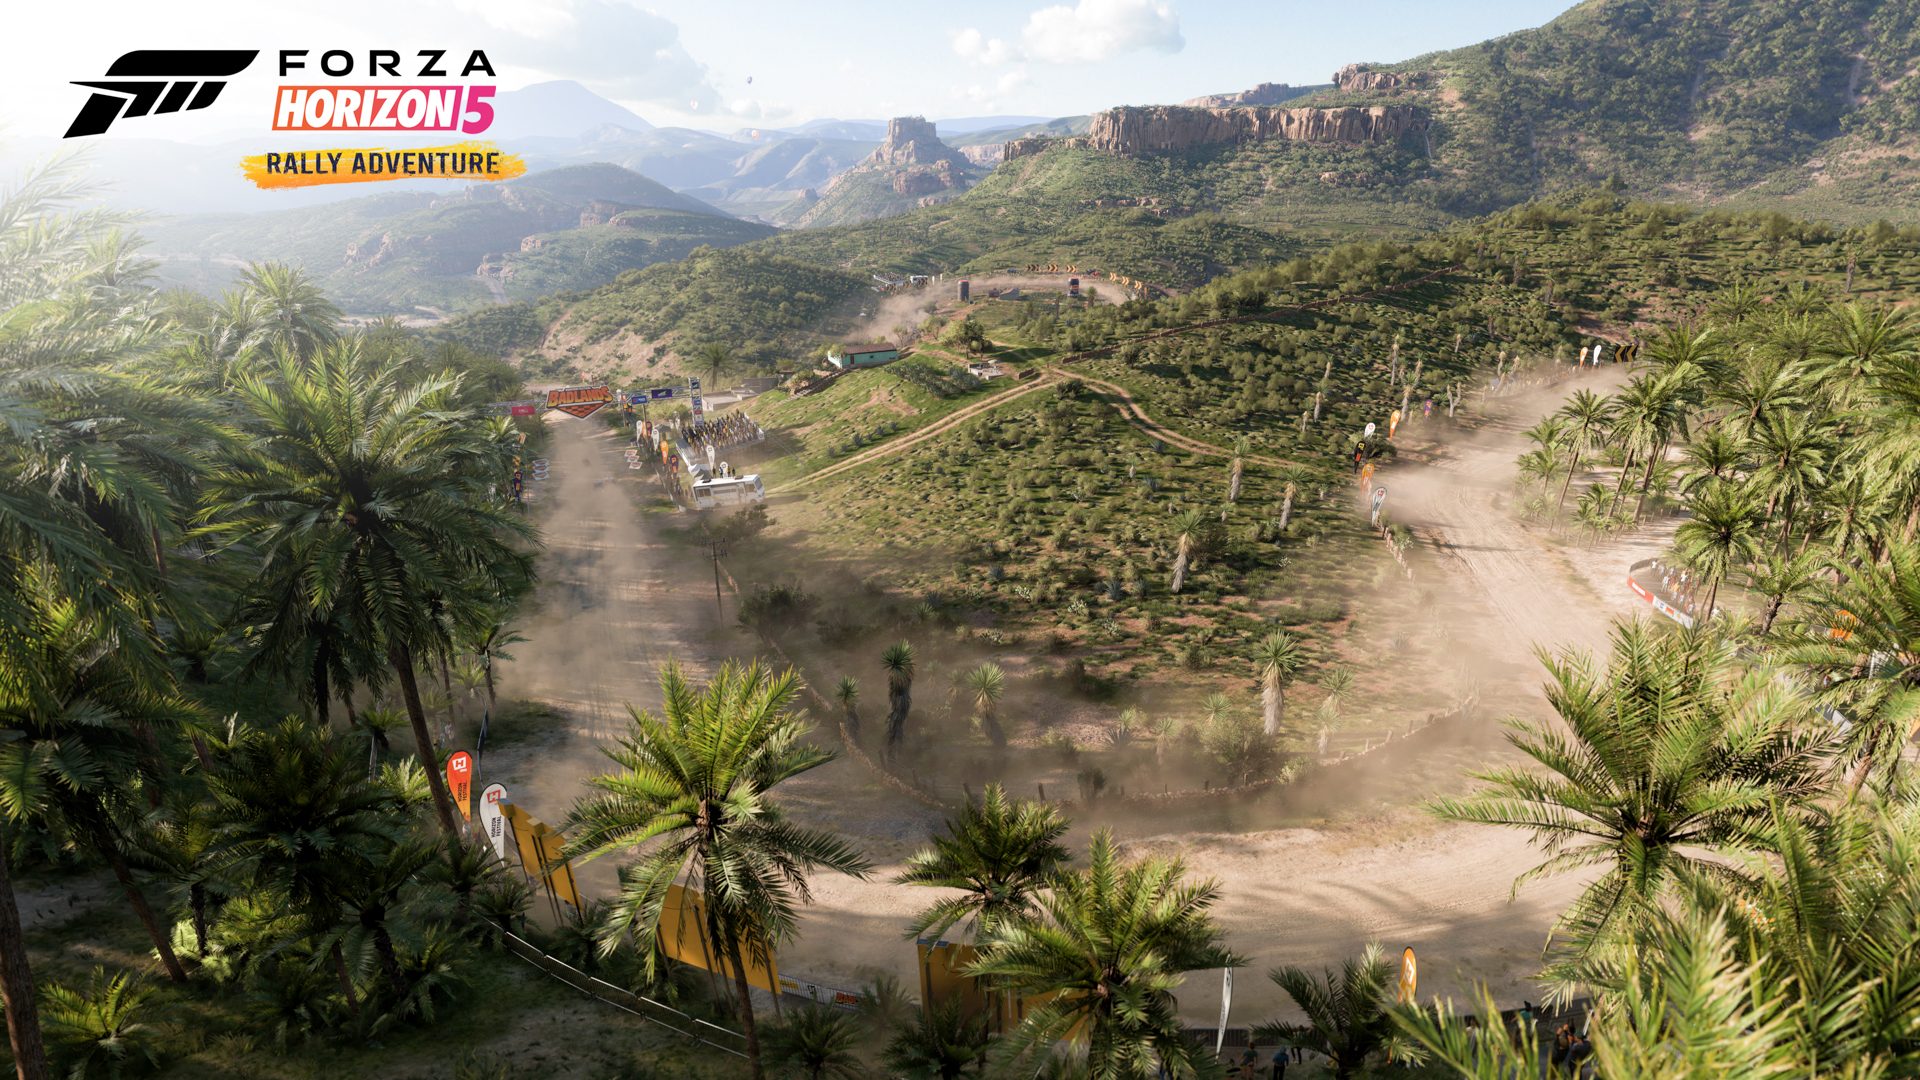 fh5-rally_adventure_expansion-biome-palm_forest_to_green_hills-steam-1920x1080_wm-74afe675a613205081c9-3736716